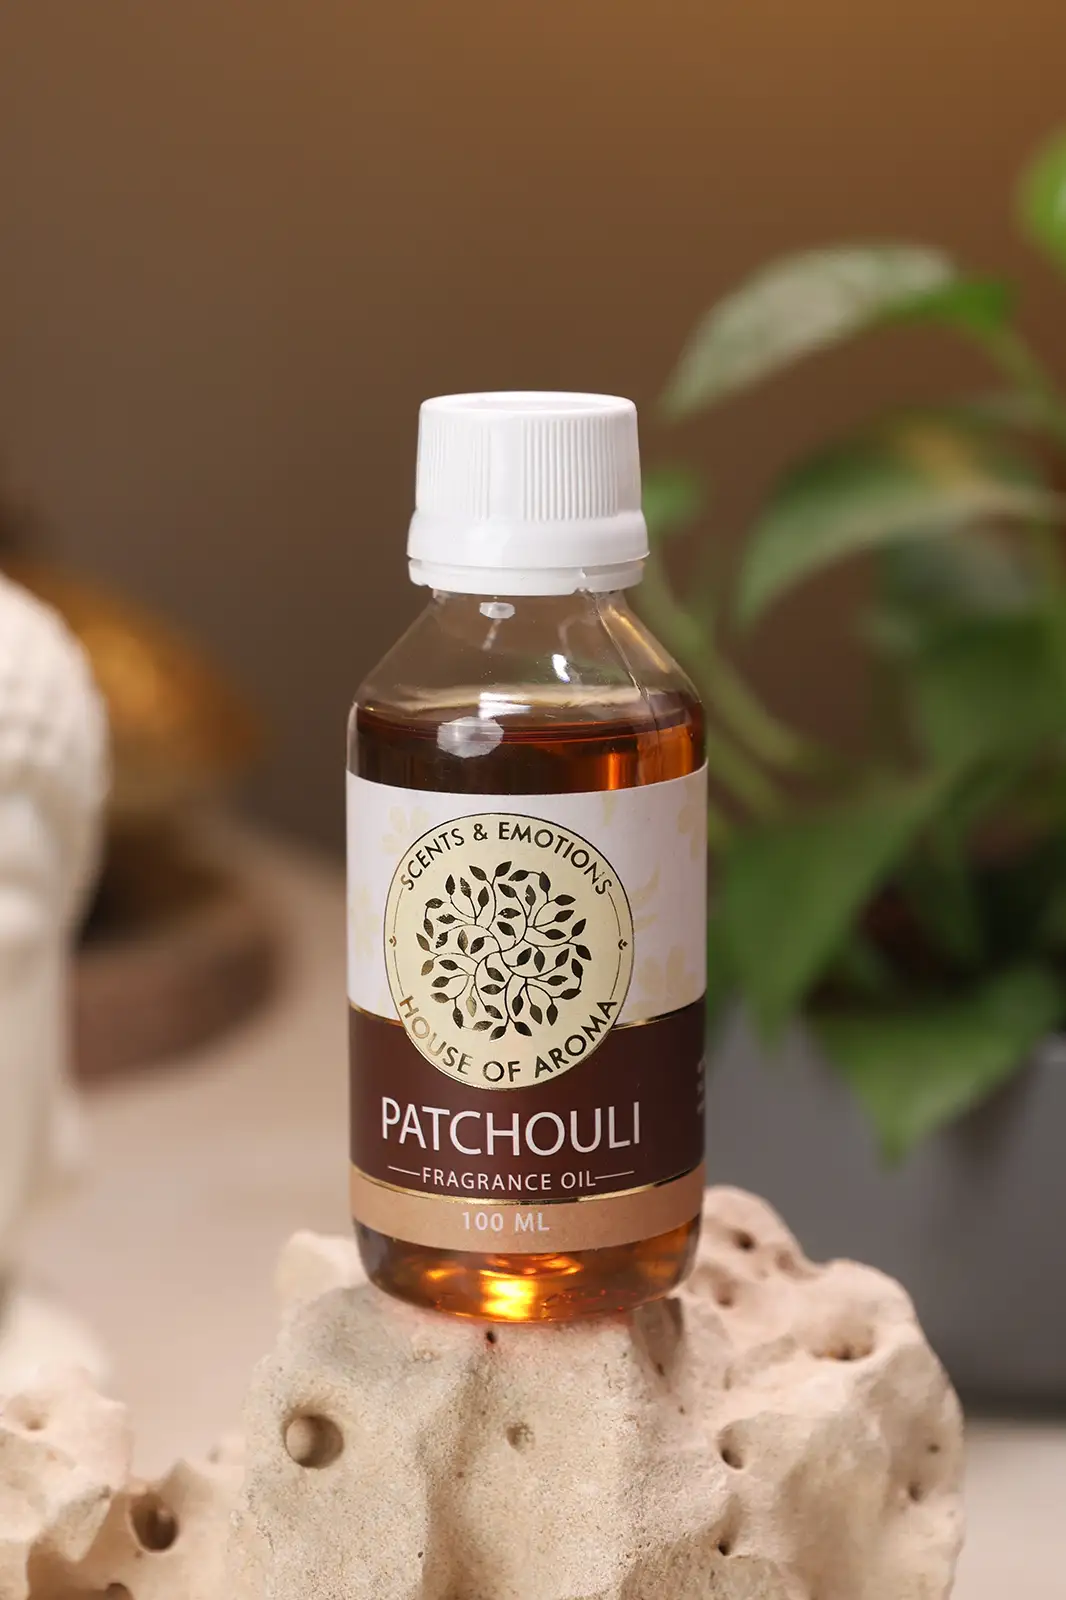 patchouli fragrance oil 100ml, Fragrance Oil, Aroma oil, Synthetic oils, Fragrance oil for candles, oil for diffusers, Aromatic oil, Candle oil, Aromatherapy oil, oil manufacturers, House of Aroma, patchouli fragrance oil, patchouli aroma oil, patchouli home scented oil, patchouli oil, patchouli oil benefits, patchouli oil uses at home, benefits of patchouli oil, patchouli oil good scents